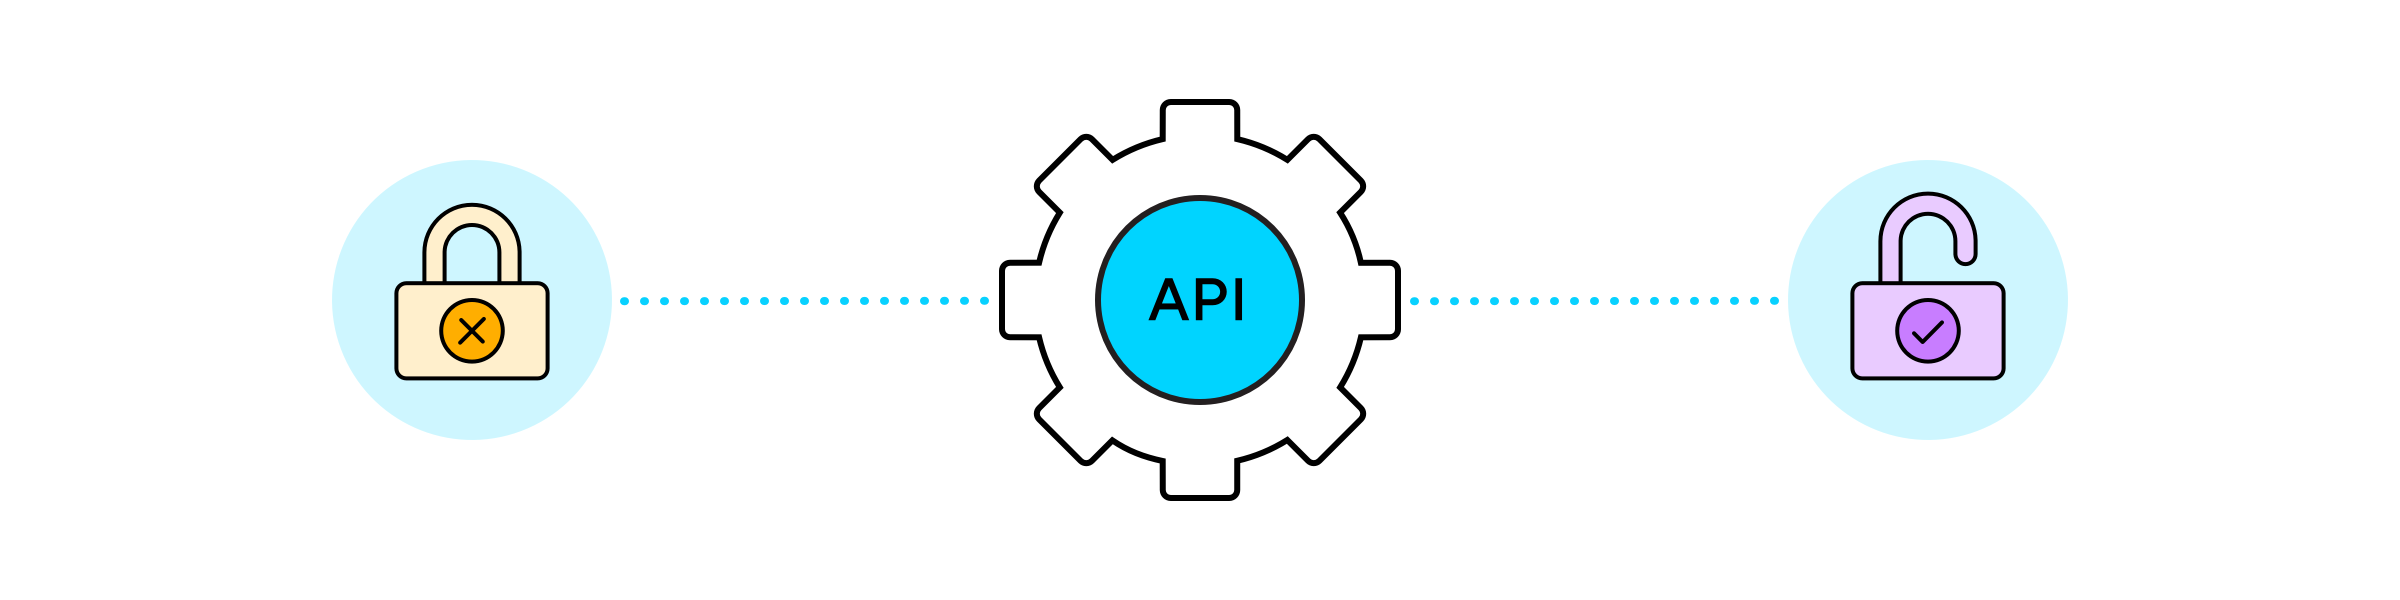 API keys vs tokens - what’s the difference? — Momento